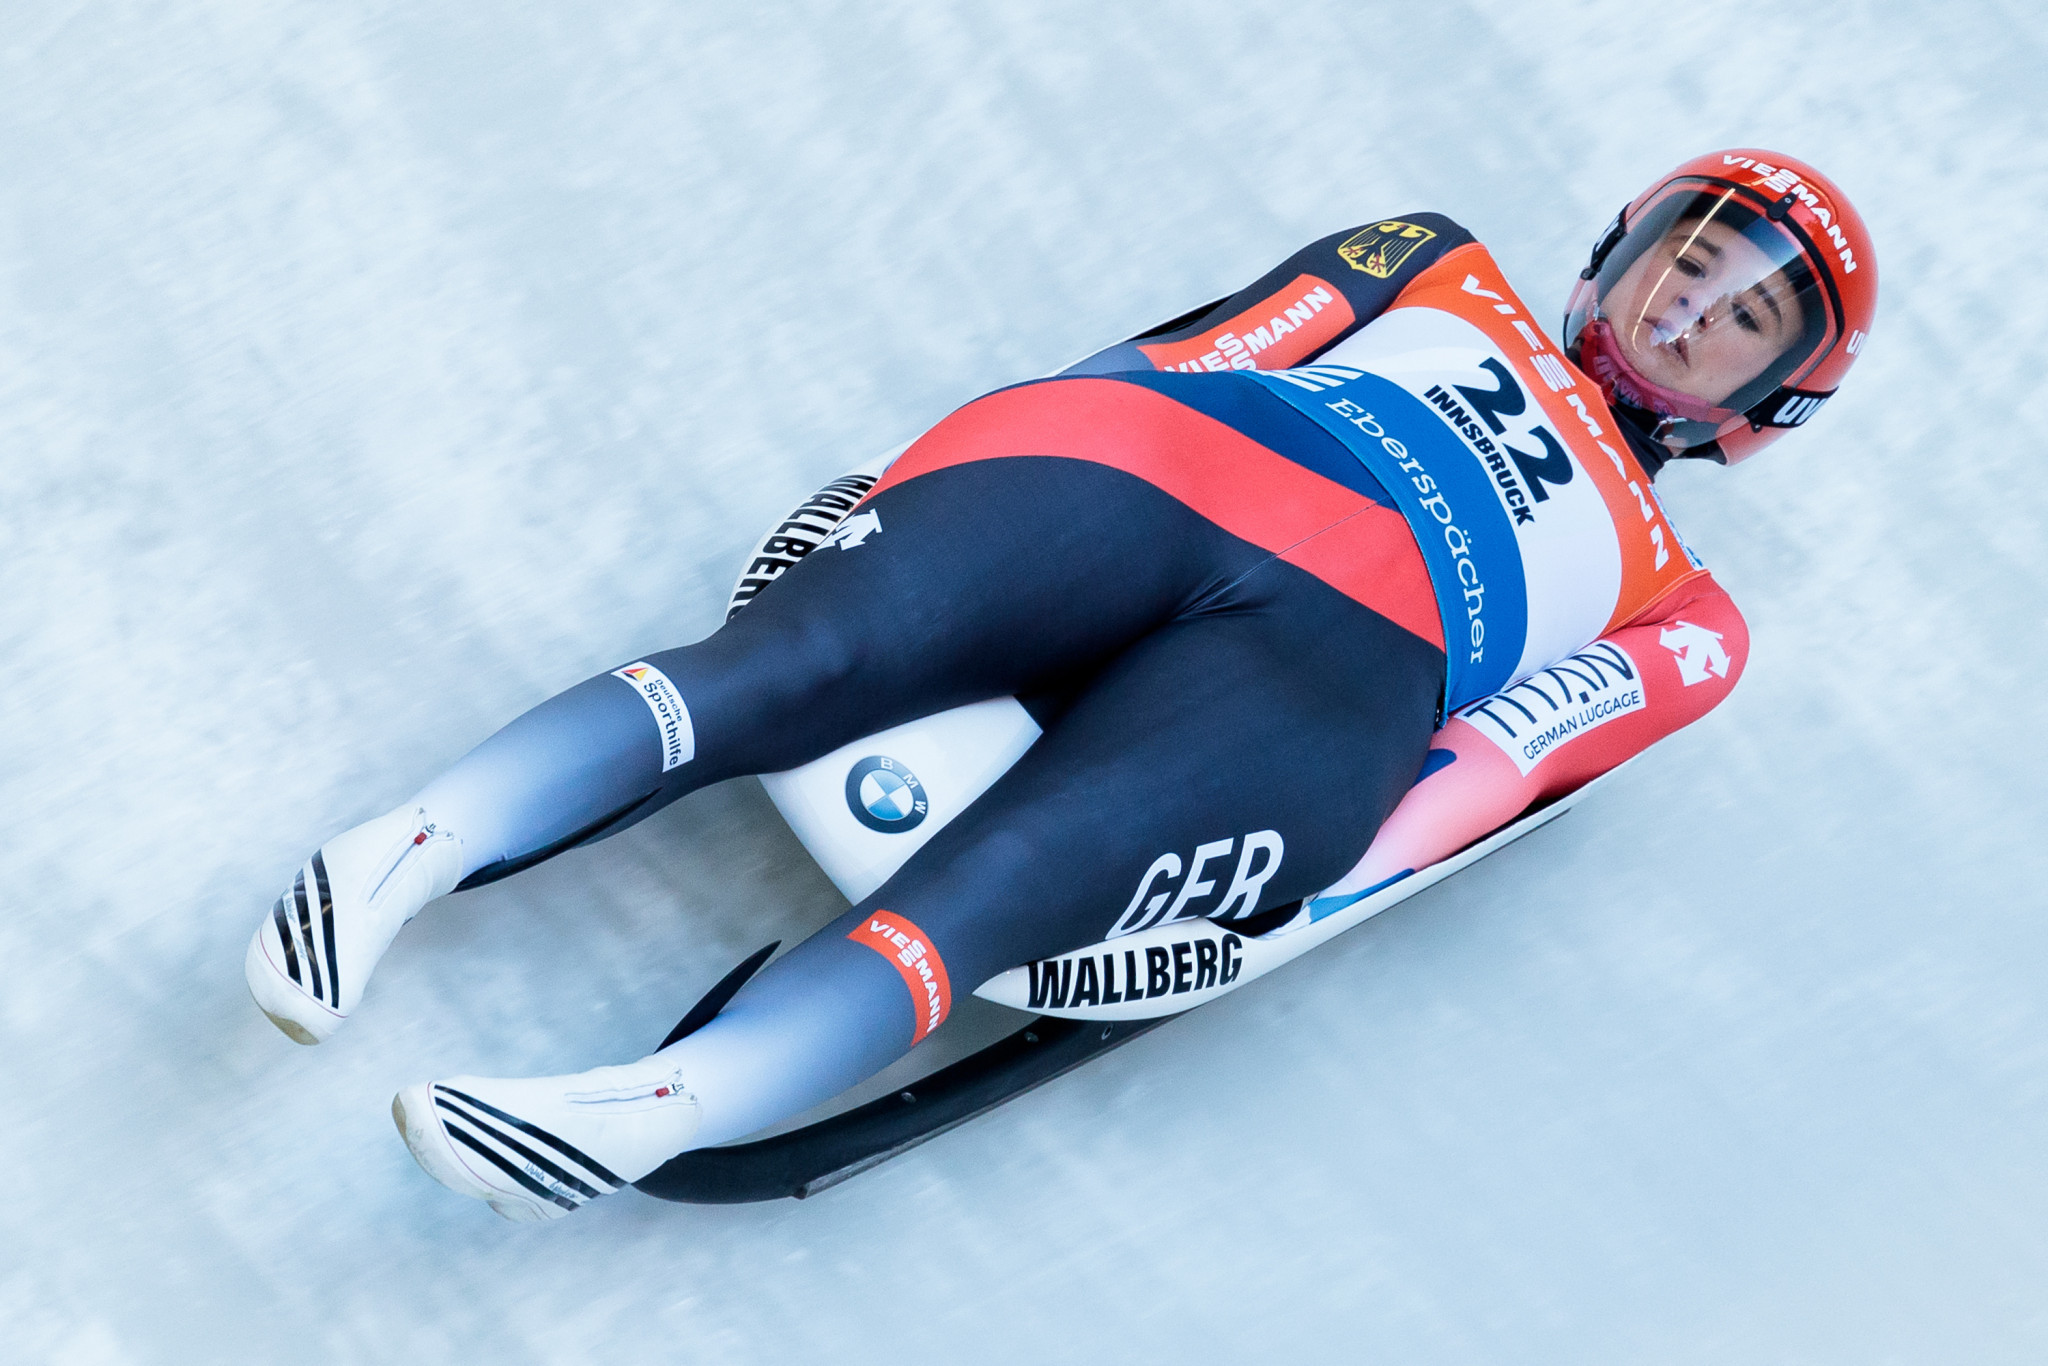 Luge World Cup opener in Innsbruck given green light despite new restrictions in Austria